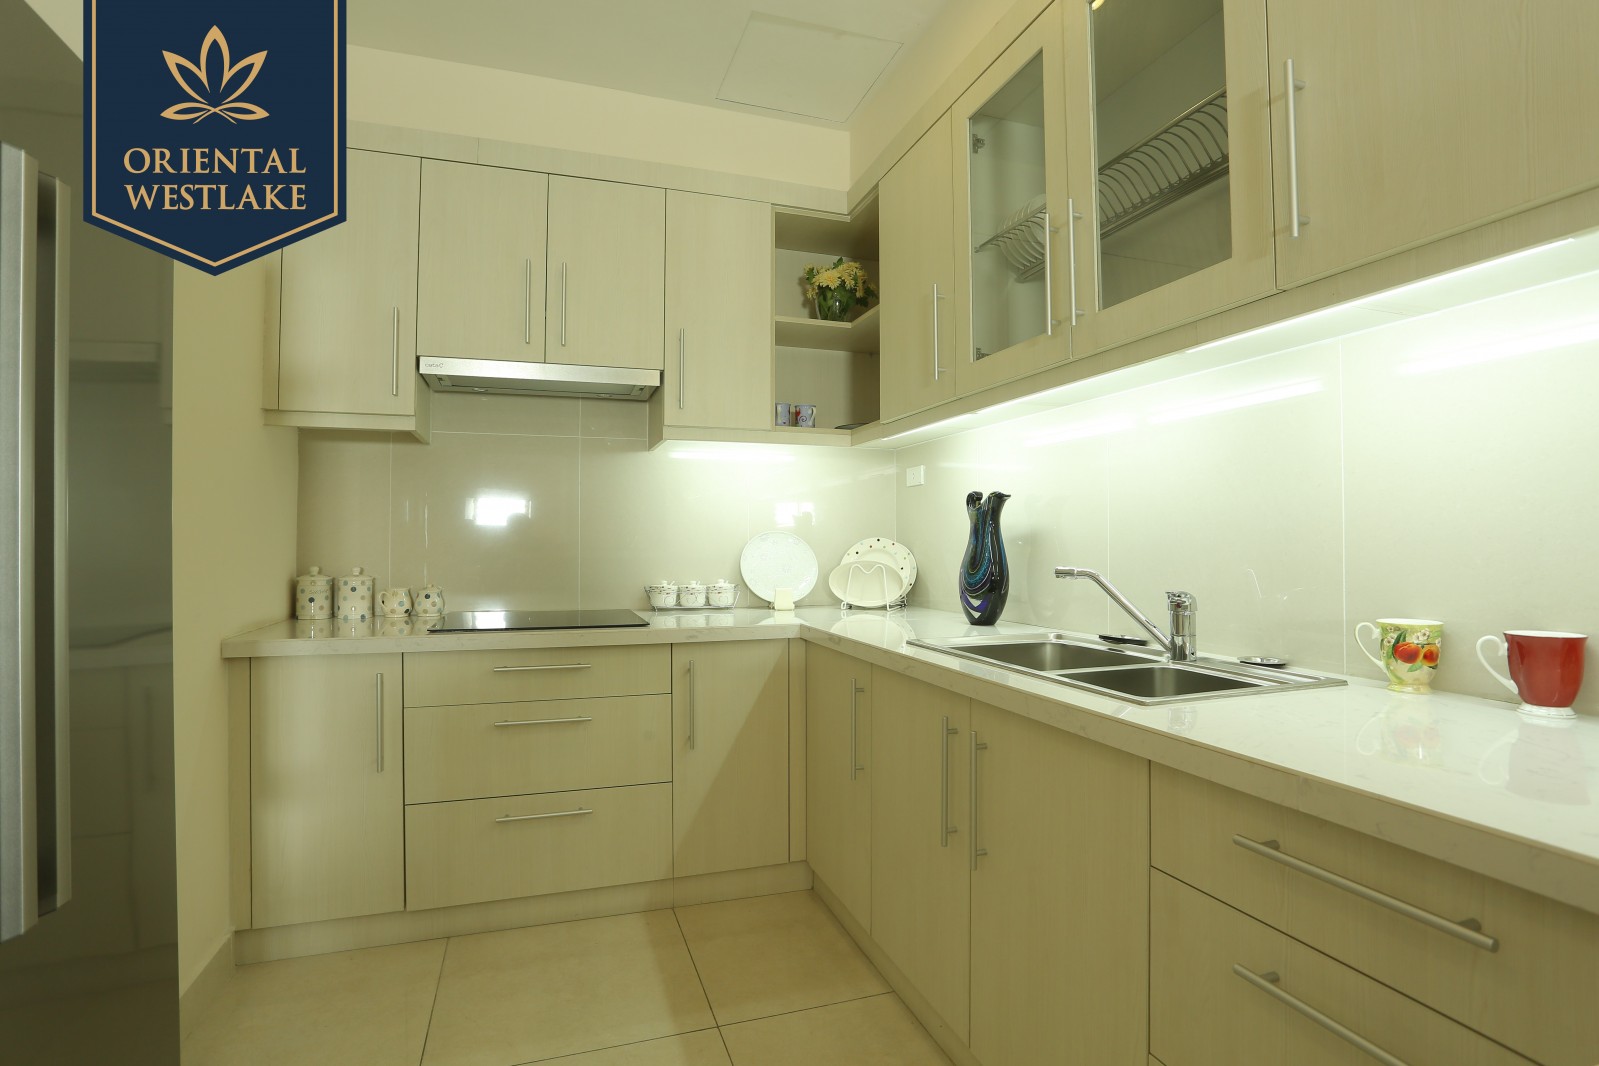 The spacious kitchen is equipped with Cata (Spanish) kitchen and other advanced equipments. Hotline 088 659 5588